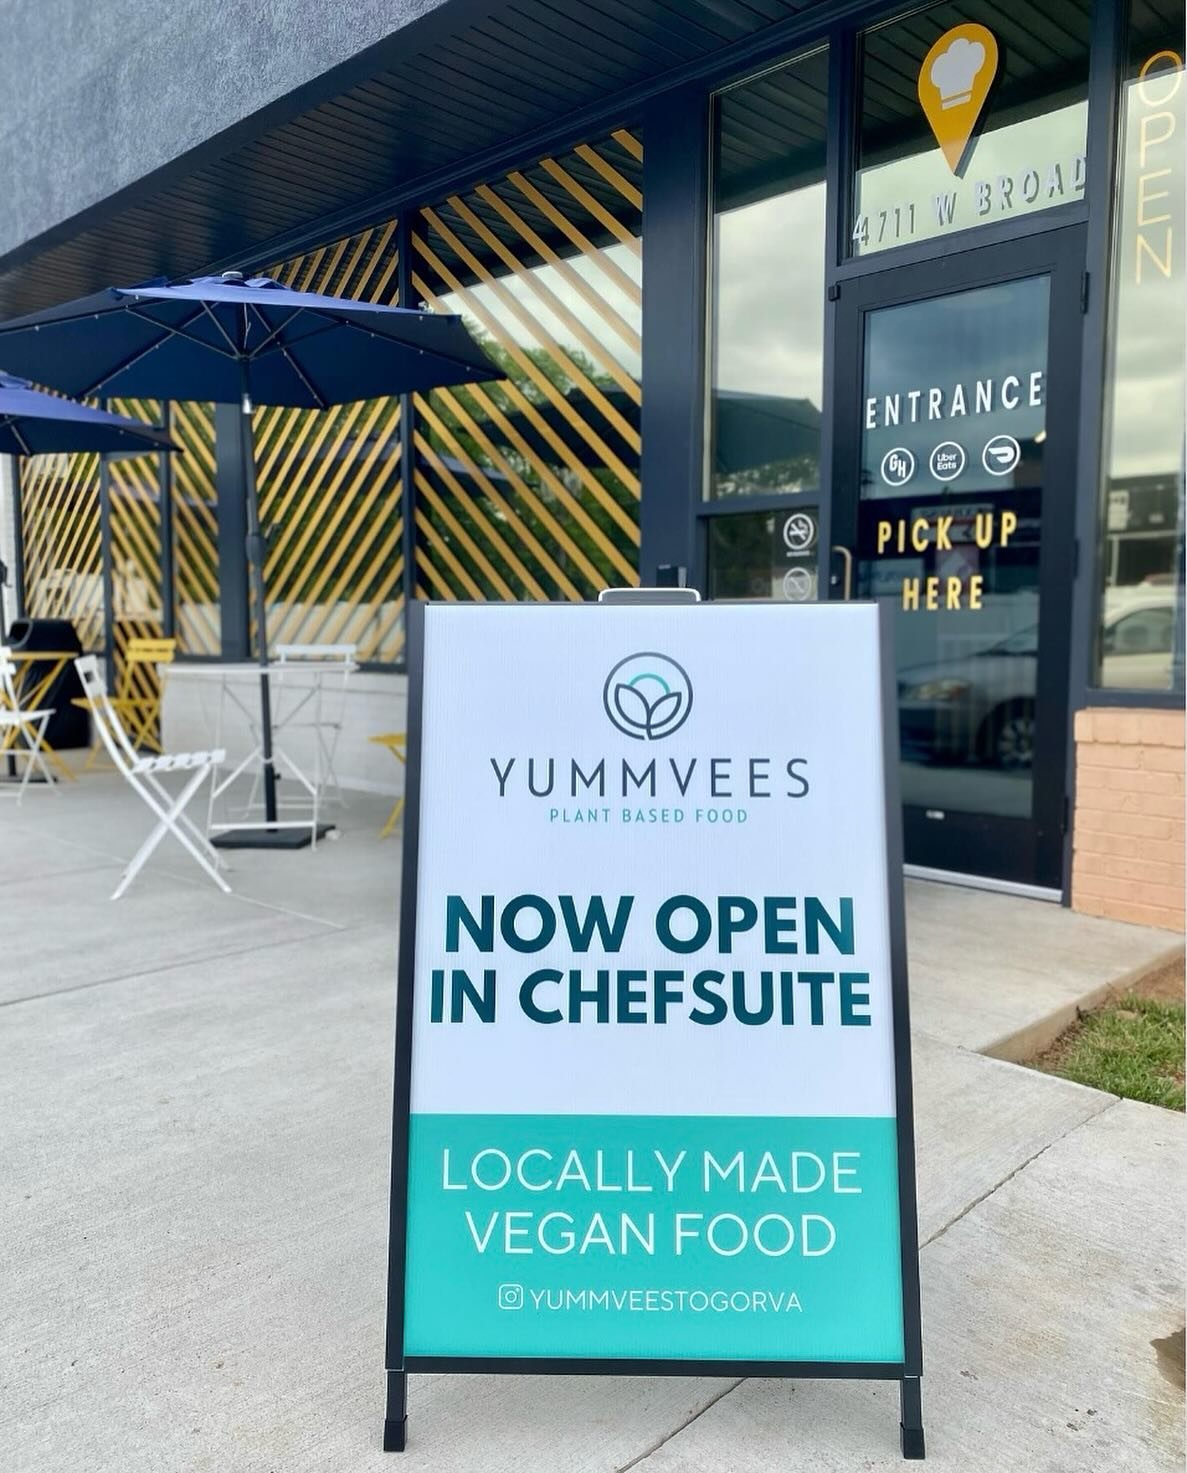 Our friends at @chefsuiterva have a new tenant and concept to enjoy. Check out @yummveestogorva for 100% homemade vegan goodness.